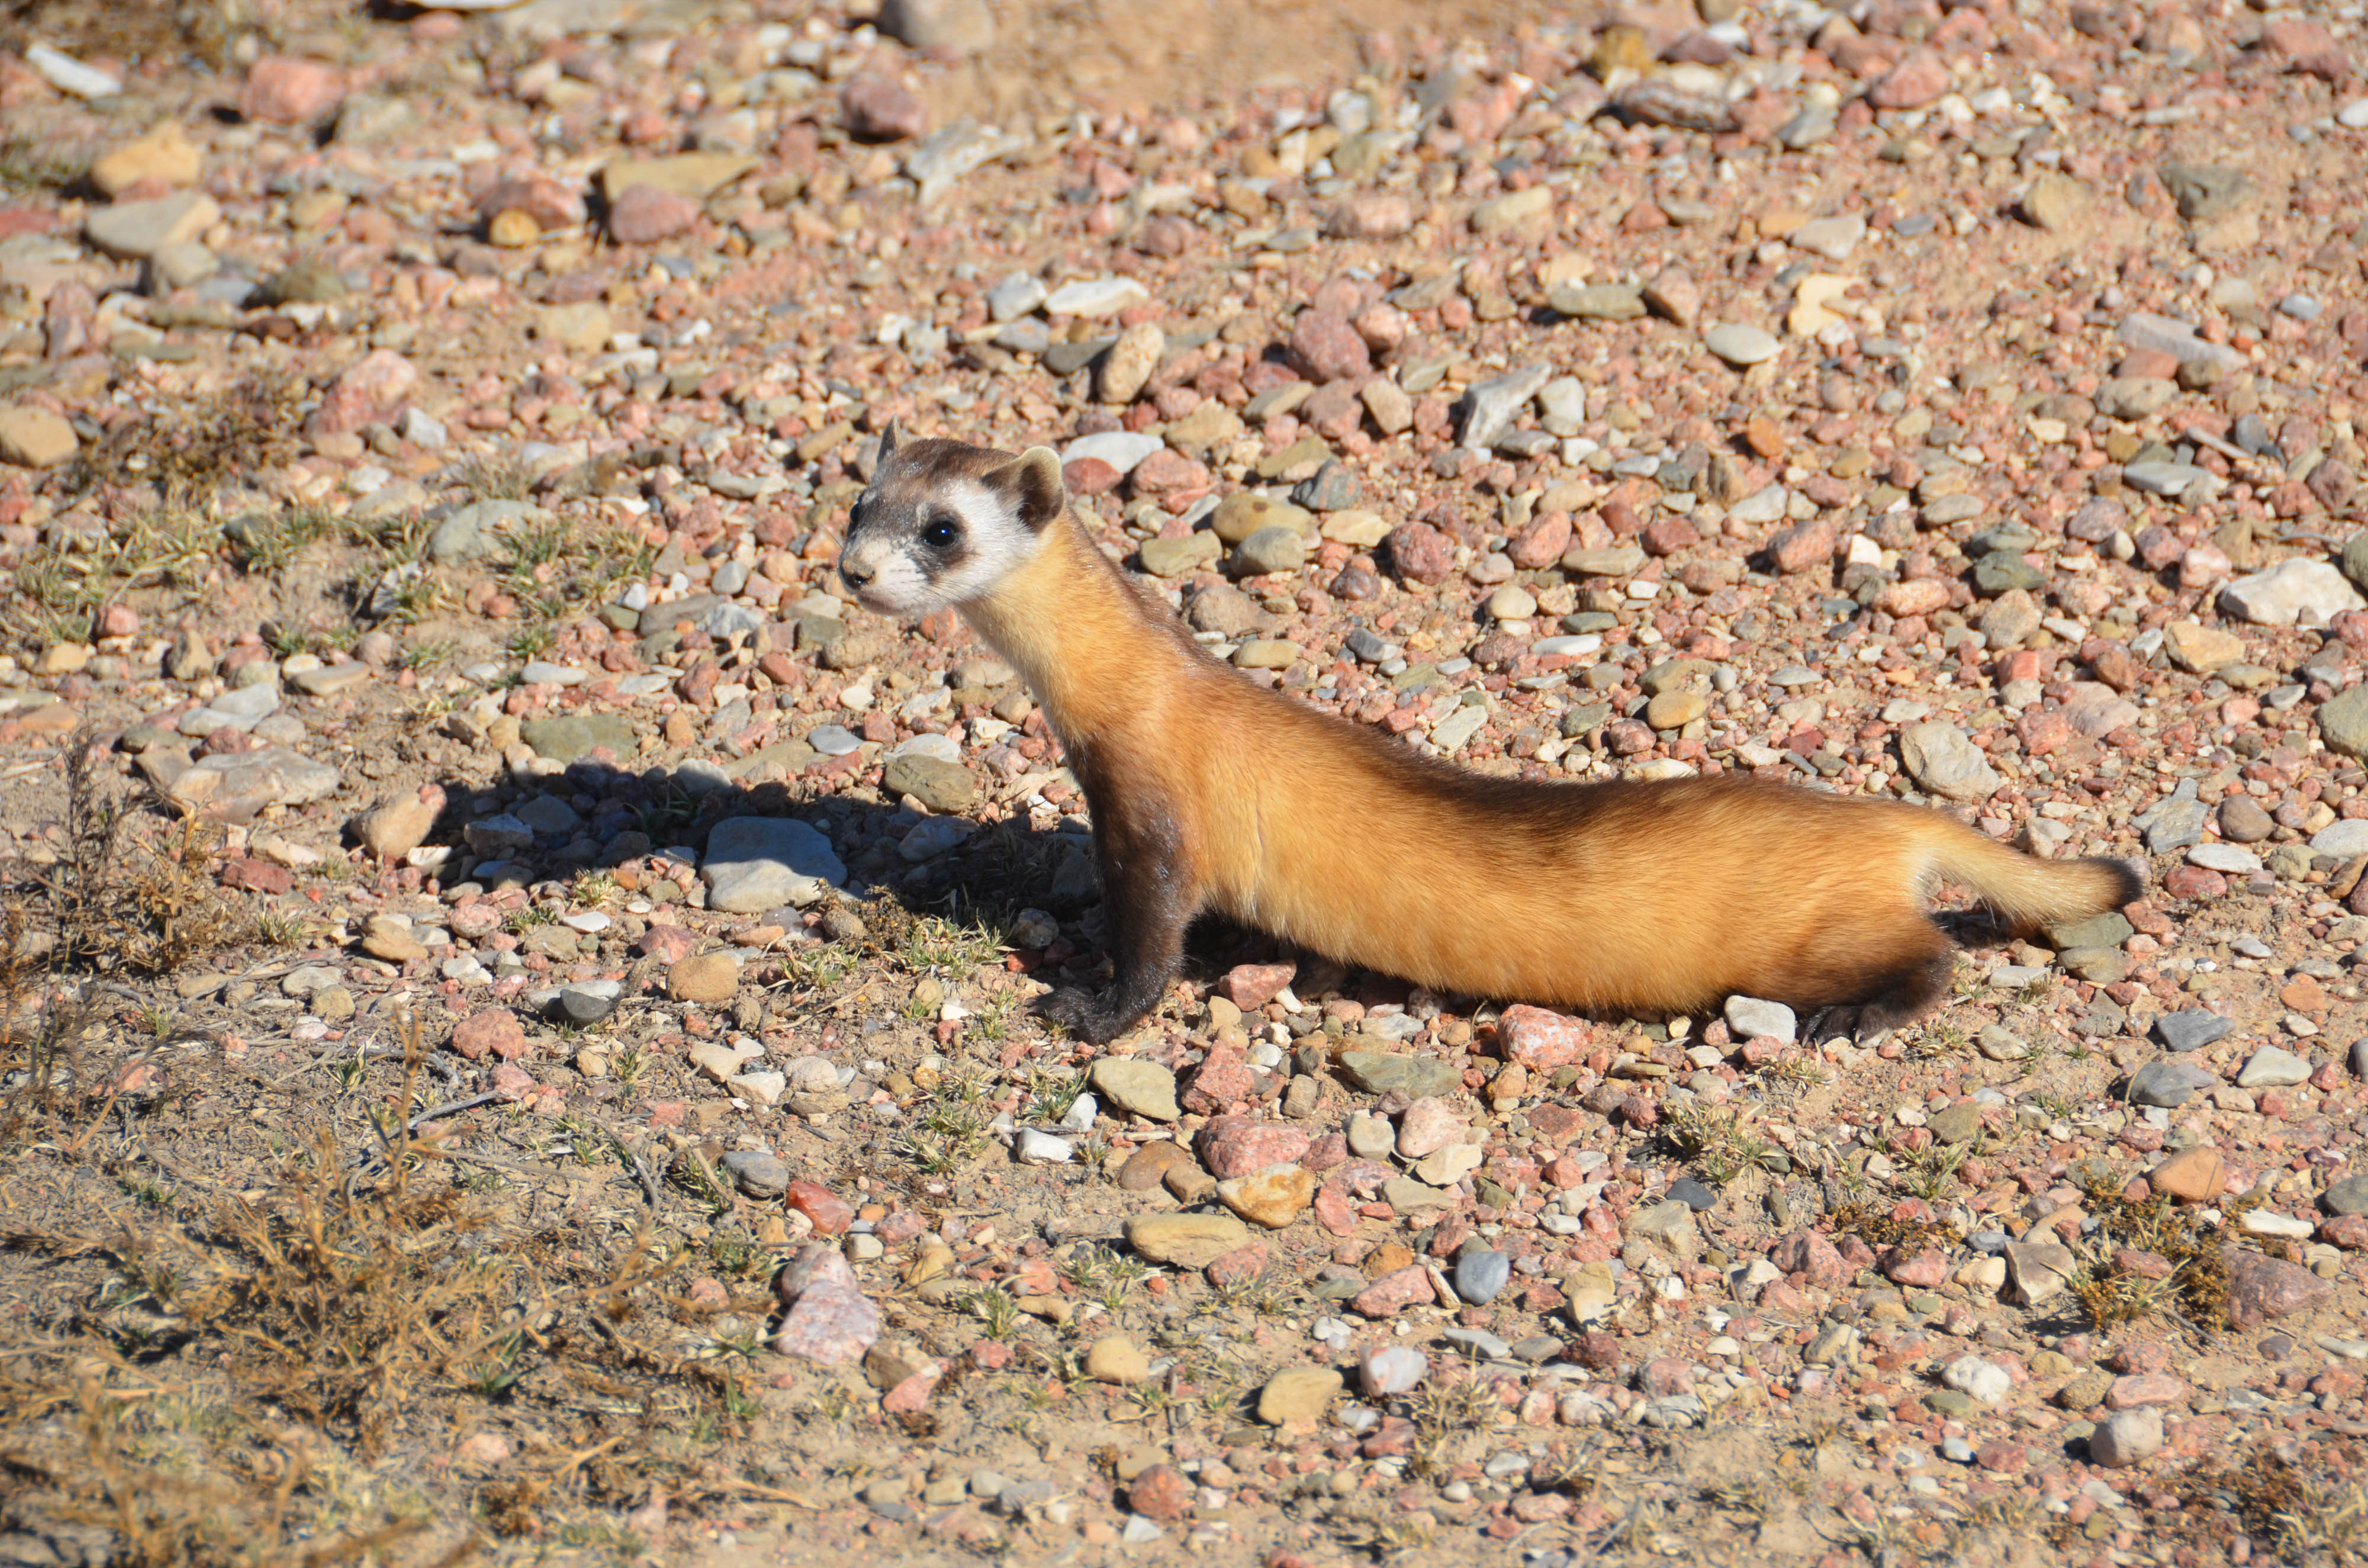 A black-footed ferret standing on pebbles stretches its neck up and out looking at something off to the side.